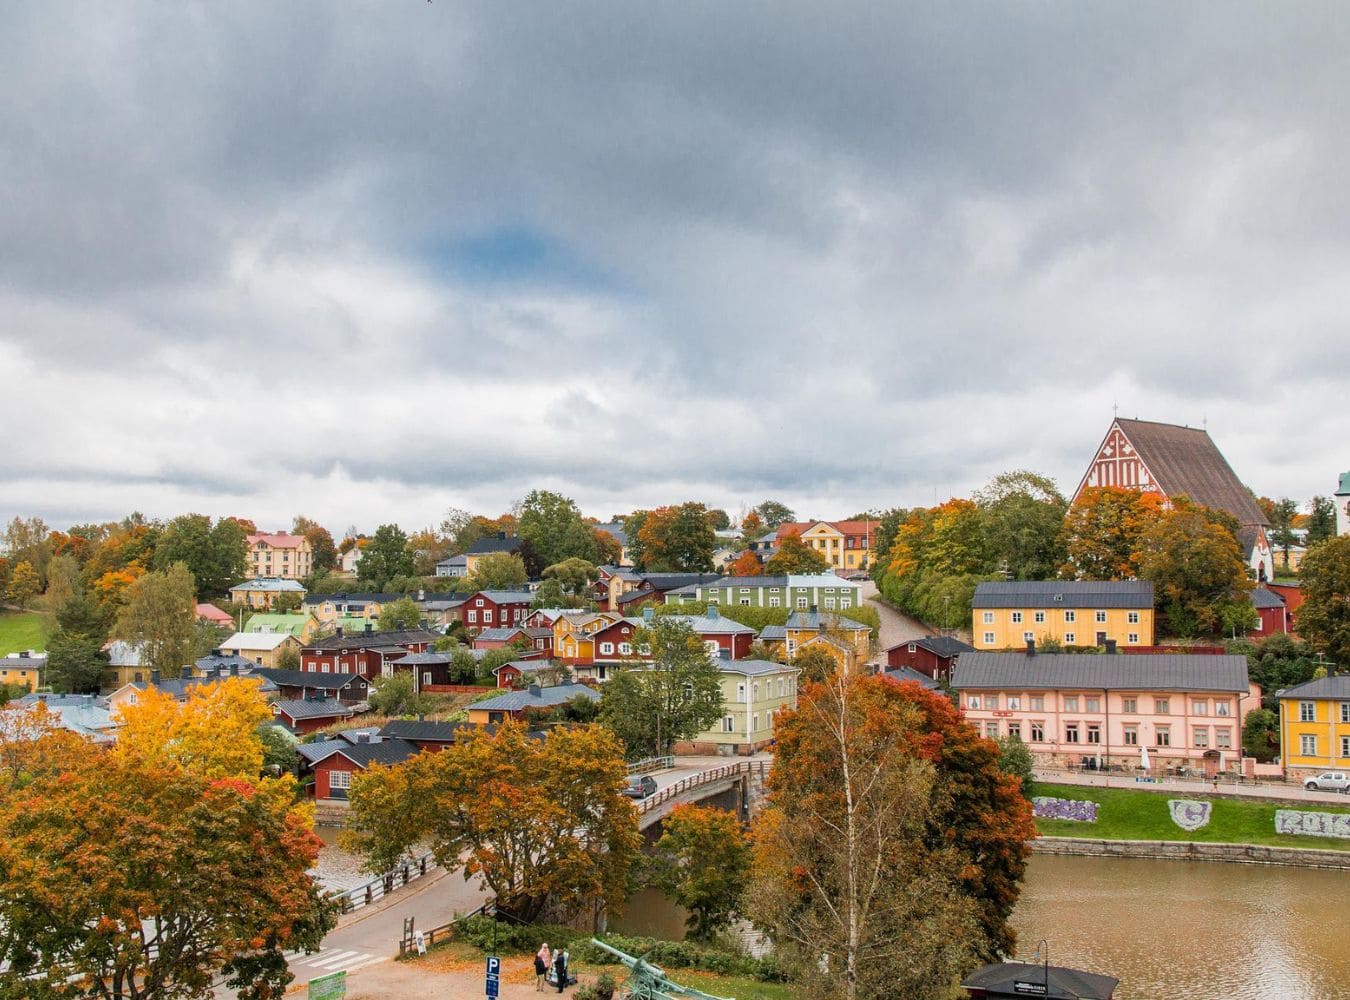 Porvoo, The Cutest Little River Town In Finland